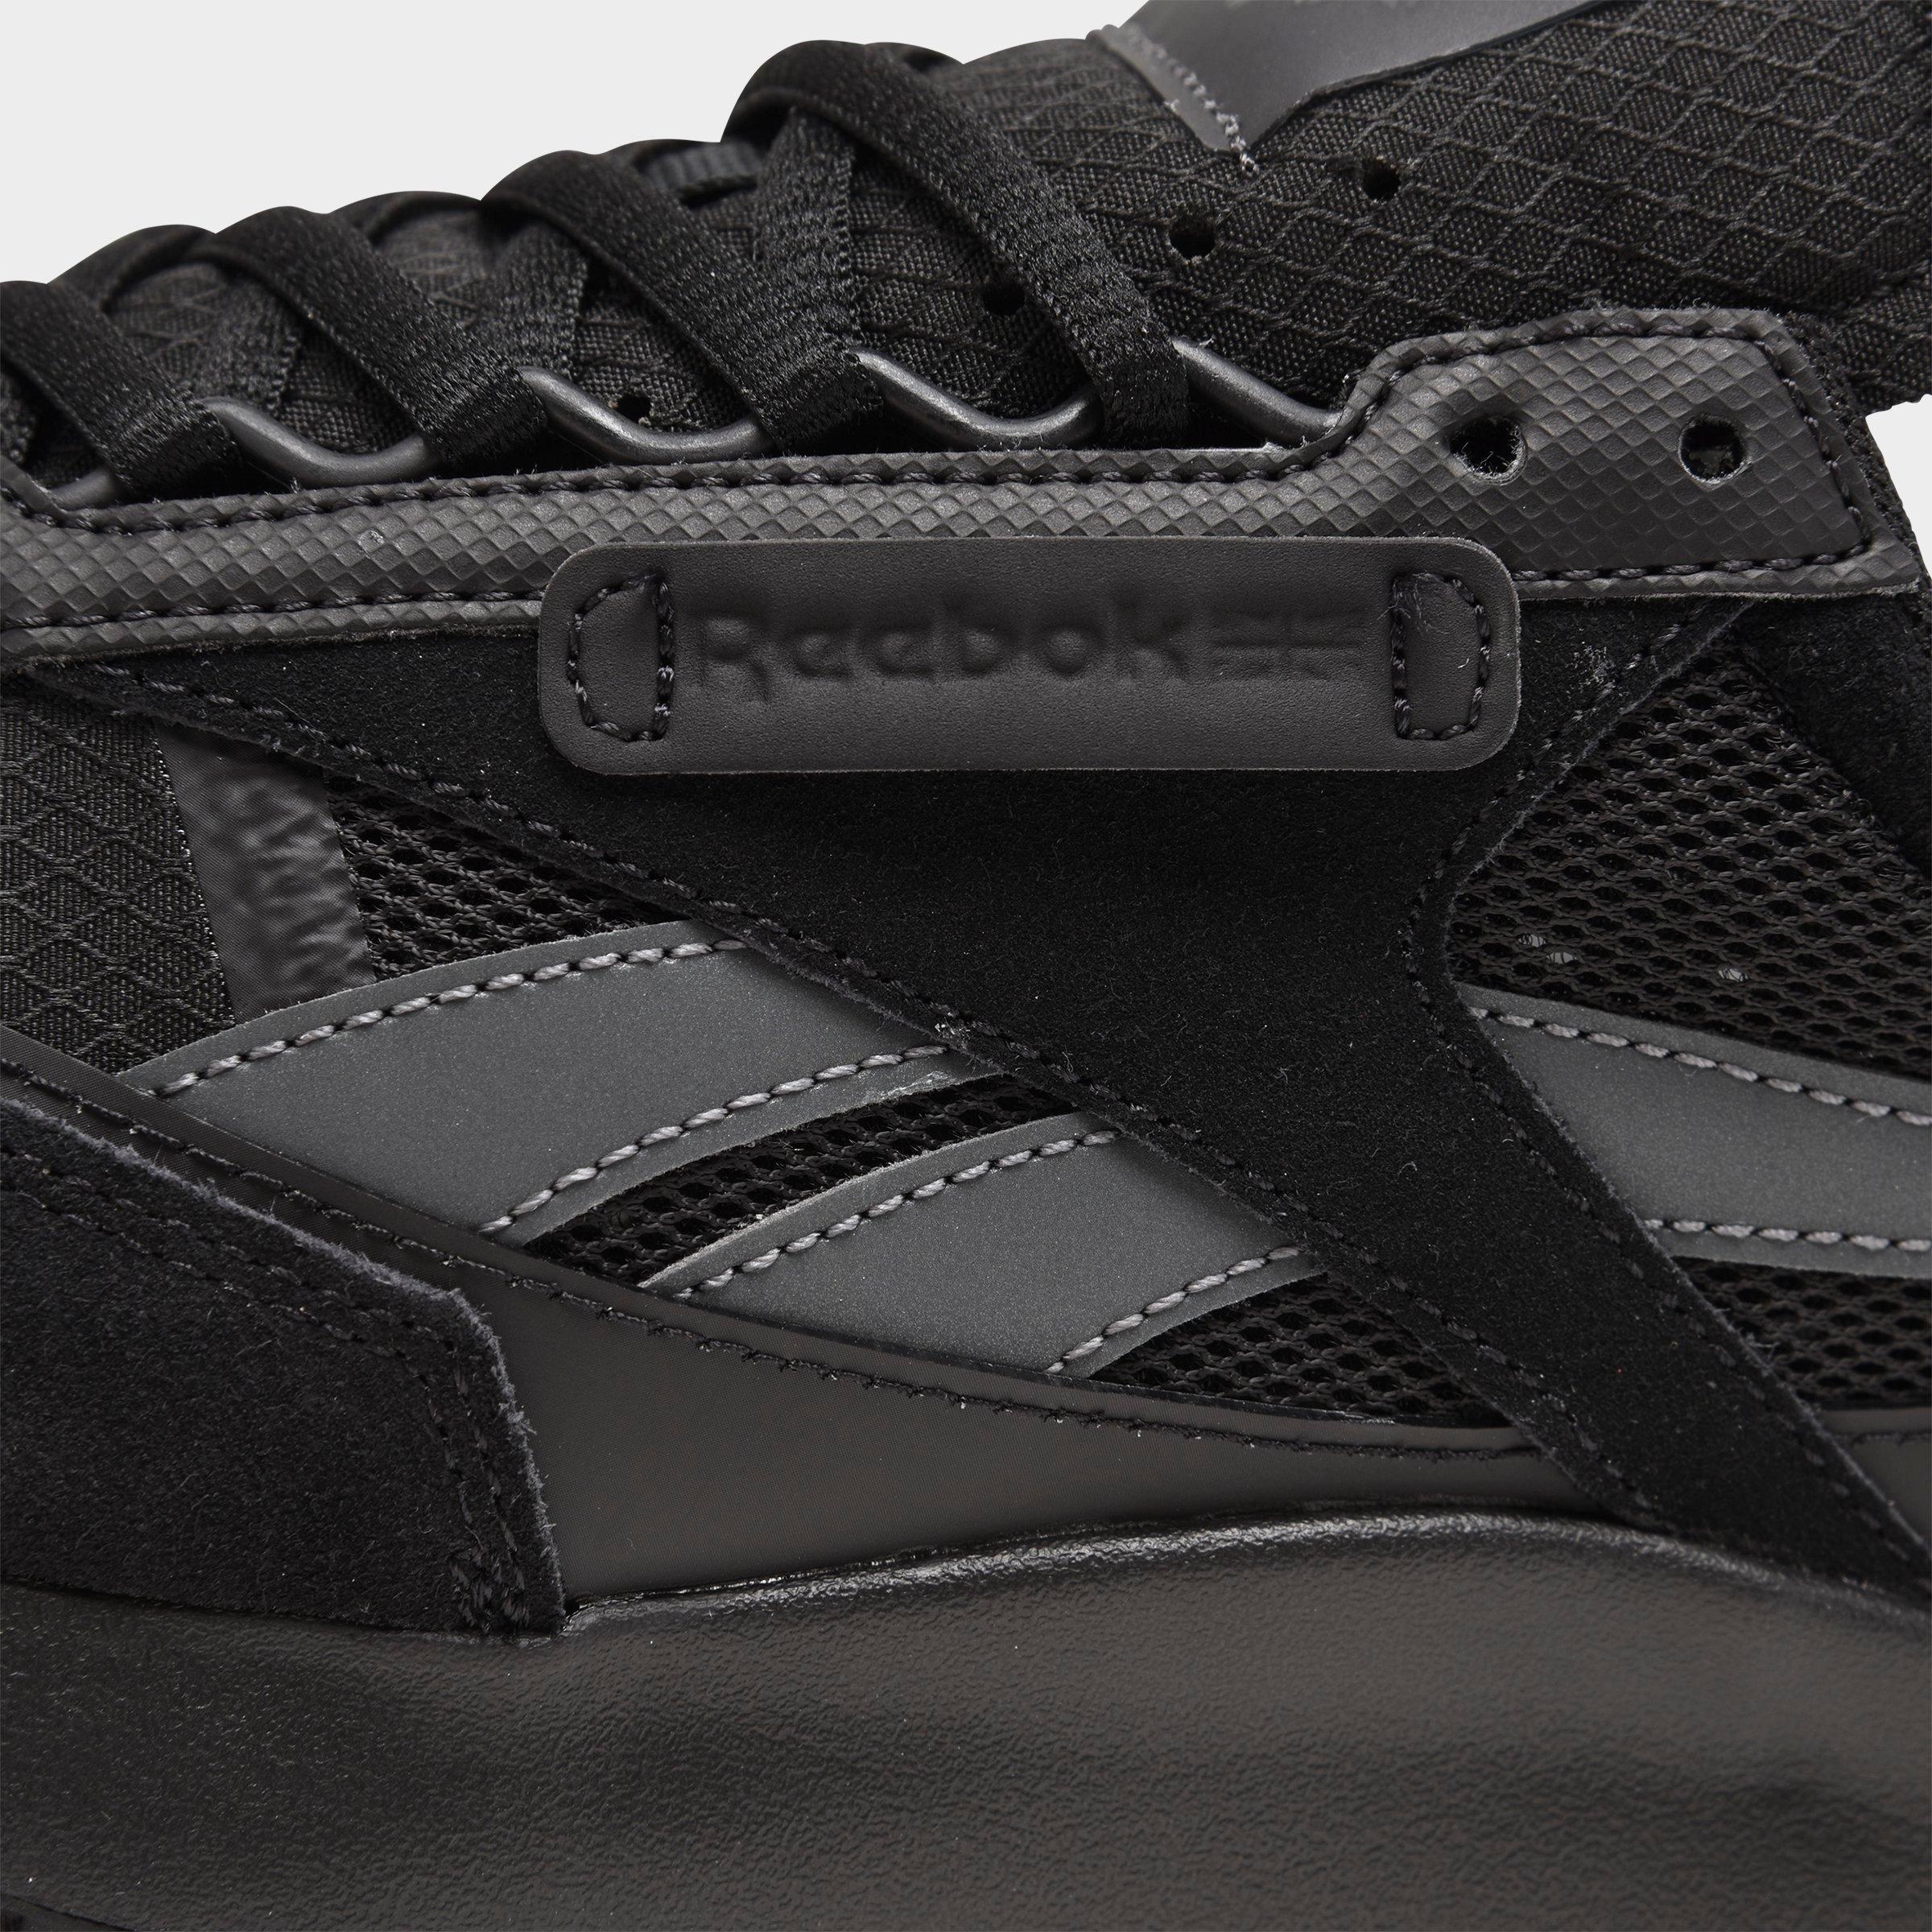 men's reebok classic leather casual shoes